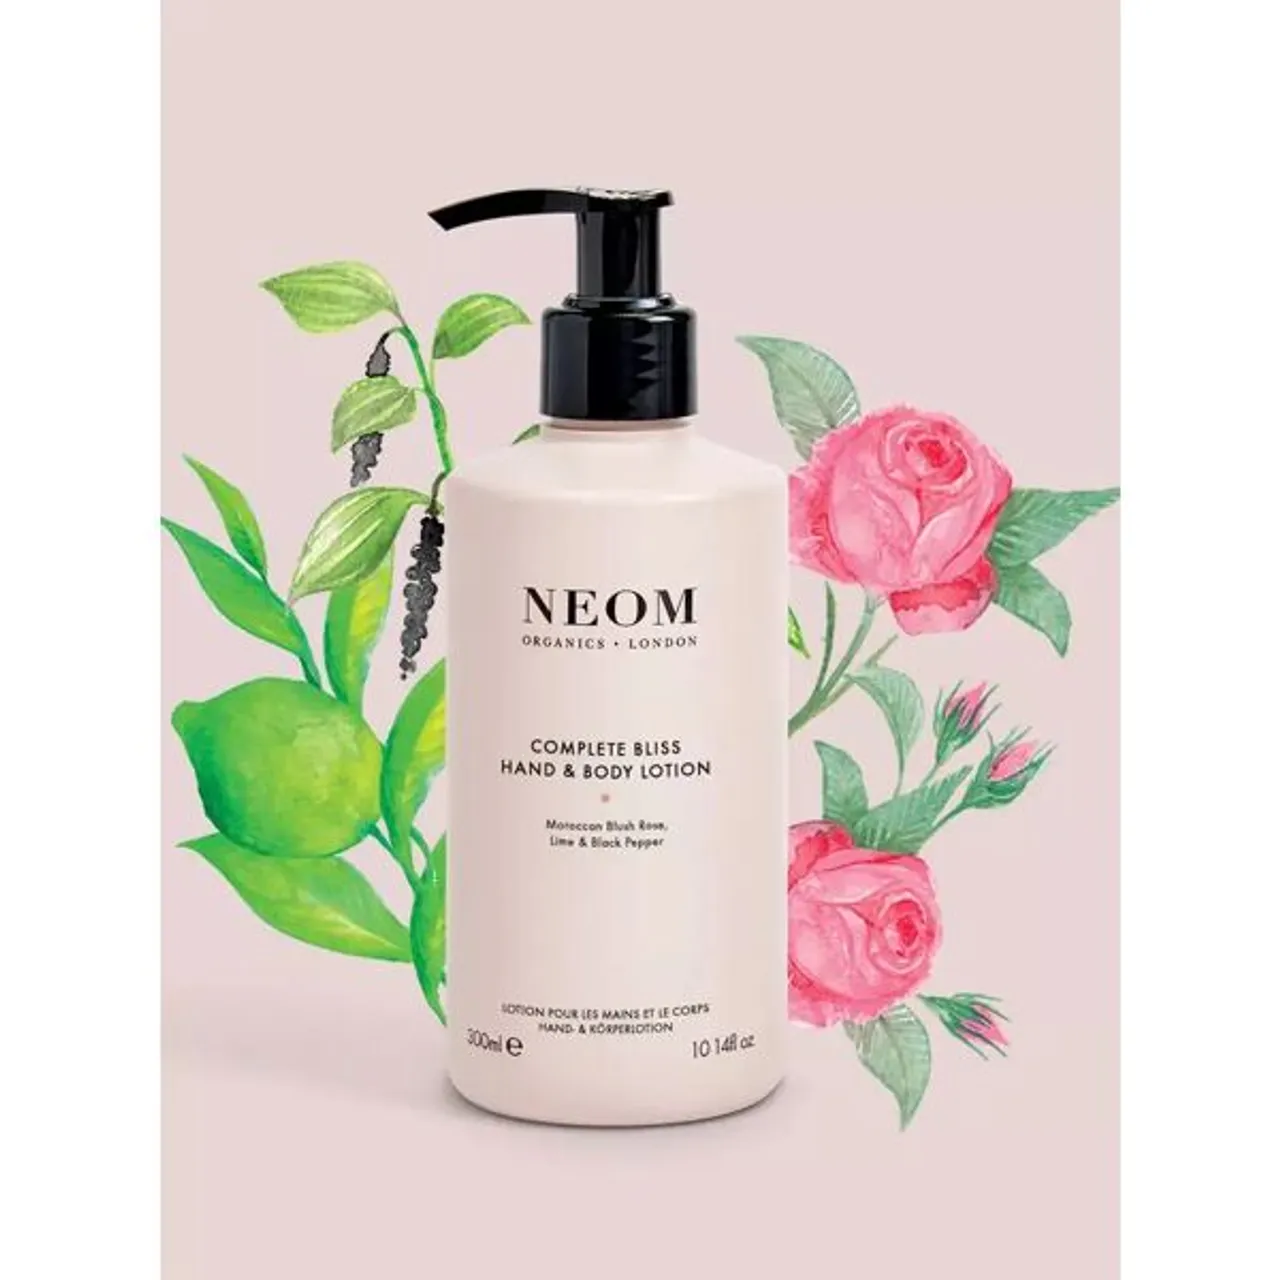 Neom Organics London Complete Bliss Hand and Body Lotion, 300ml - Unisex - Size: 300ml